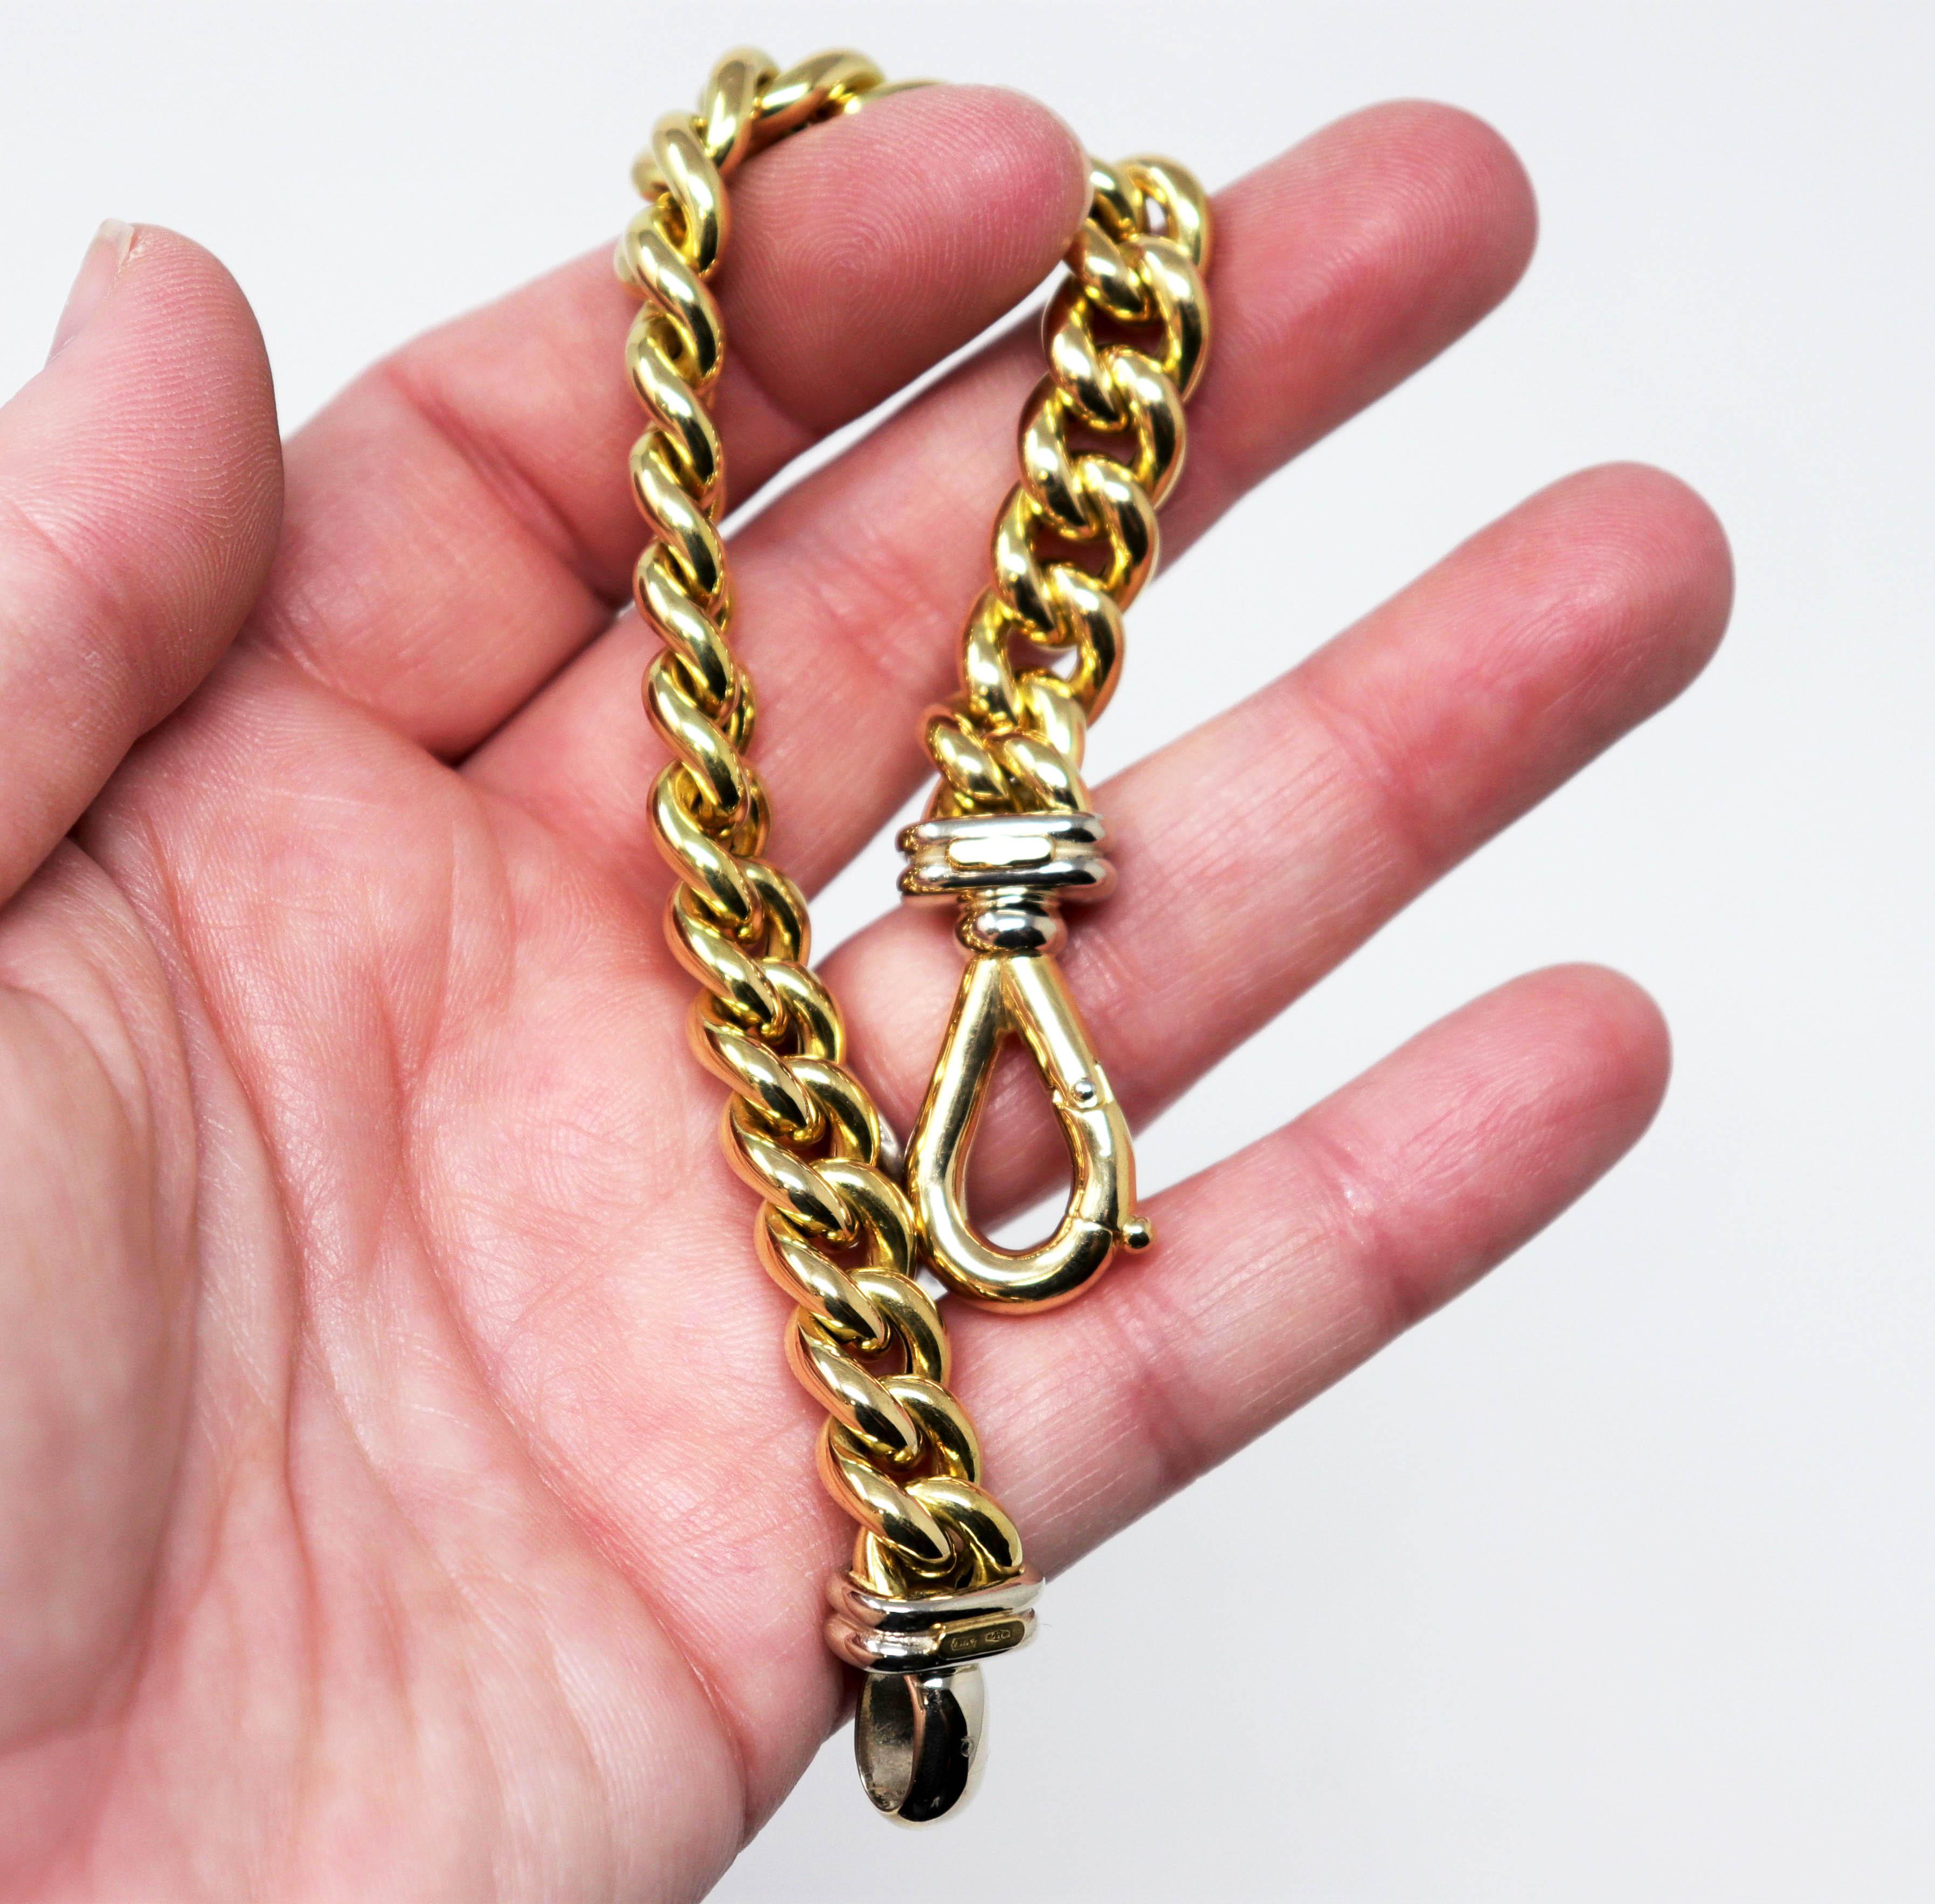 Signoretti Polished 18 Karat Yellow and White Gold Curb Chain Link Bracelet 6